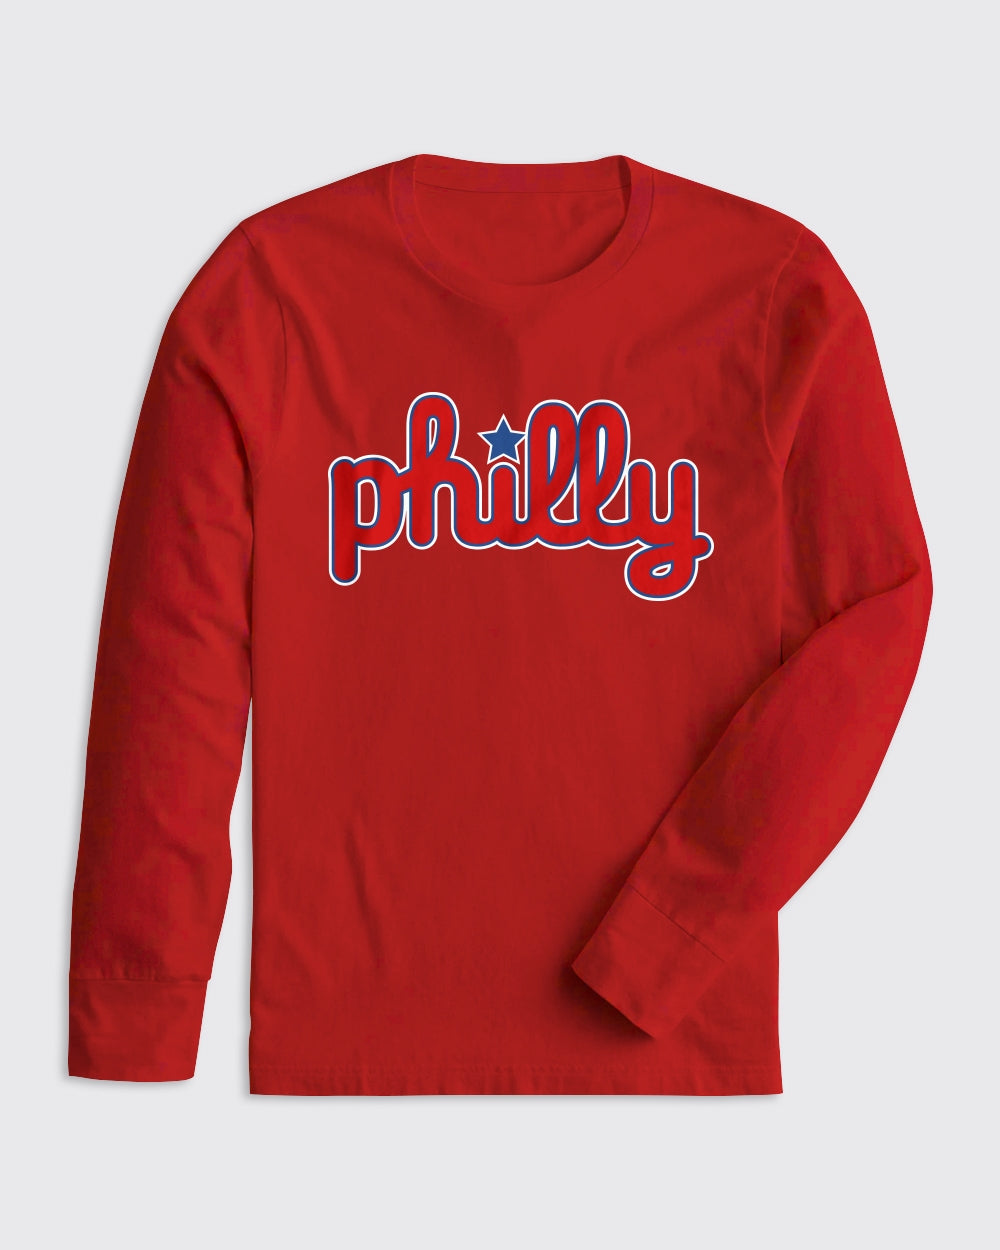 Philly Legendary Script Long Sleeve - Long Sleeve, Phillies - Philly Sports Shirts